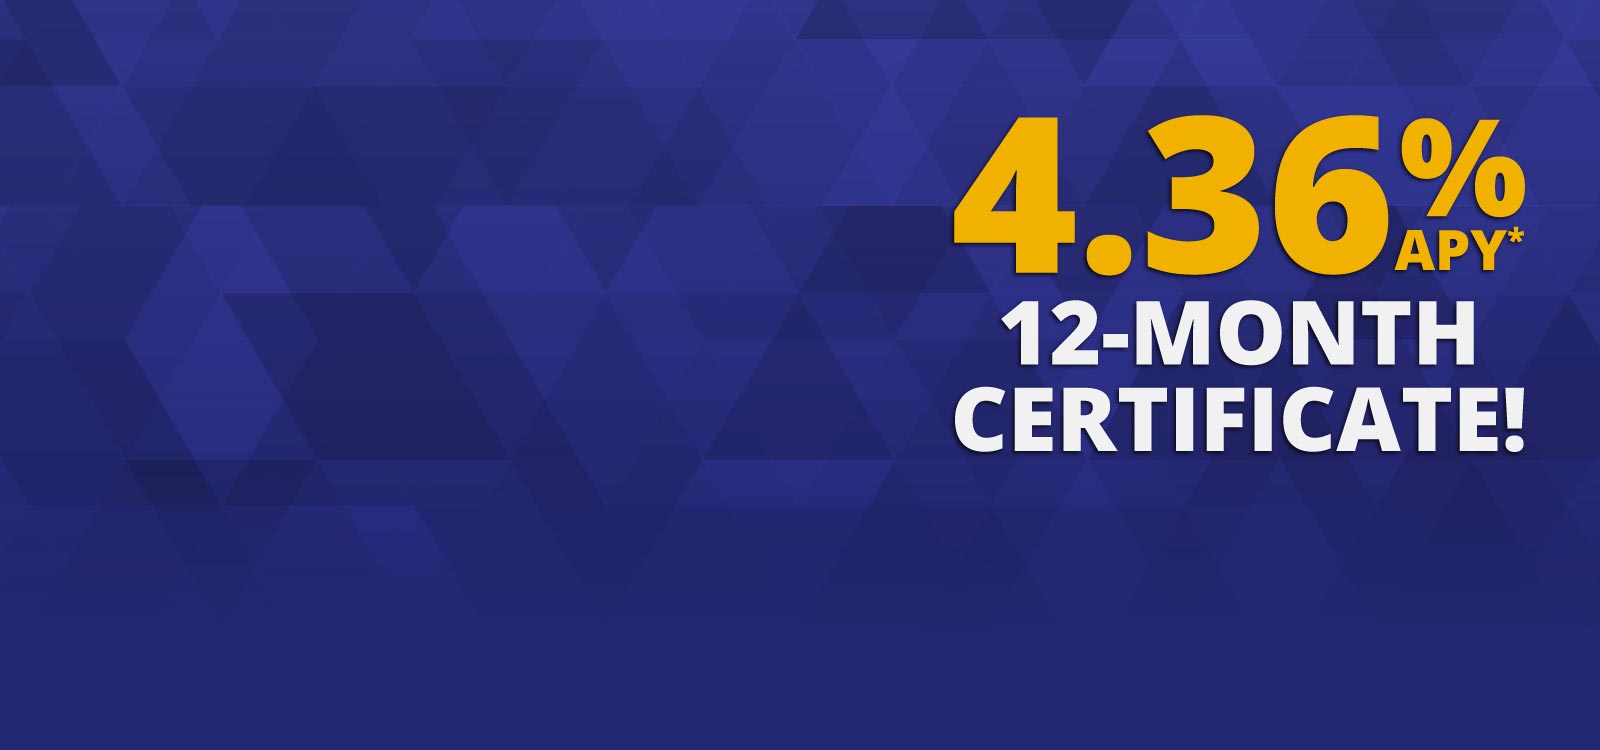 4.36% APY* 12-Month Certificate Special Offer Available graphic